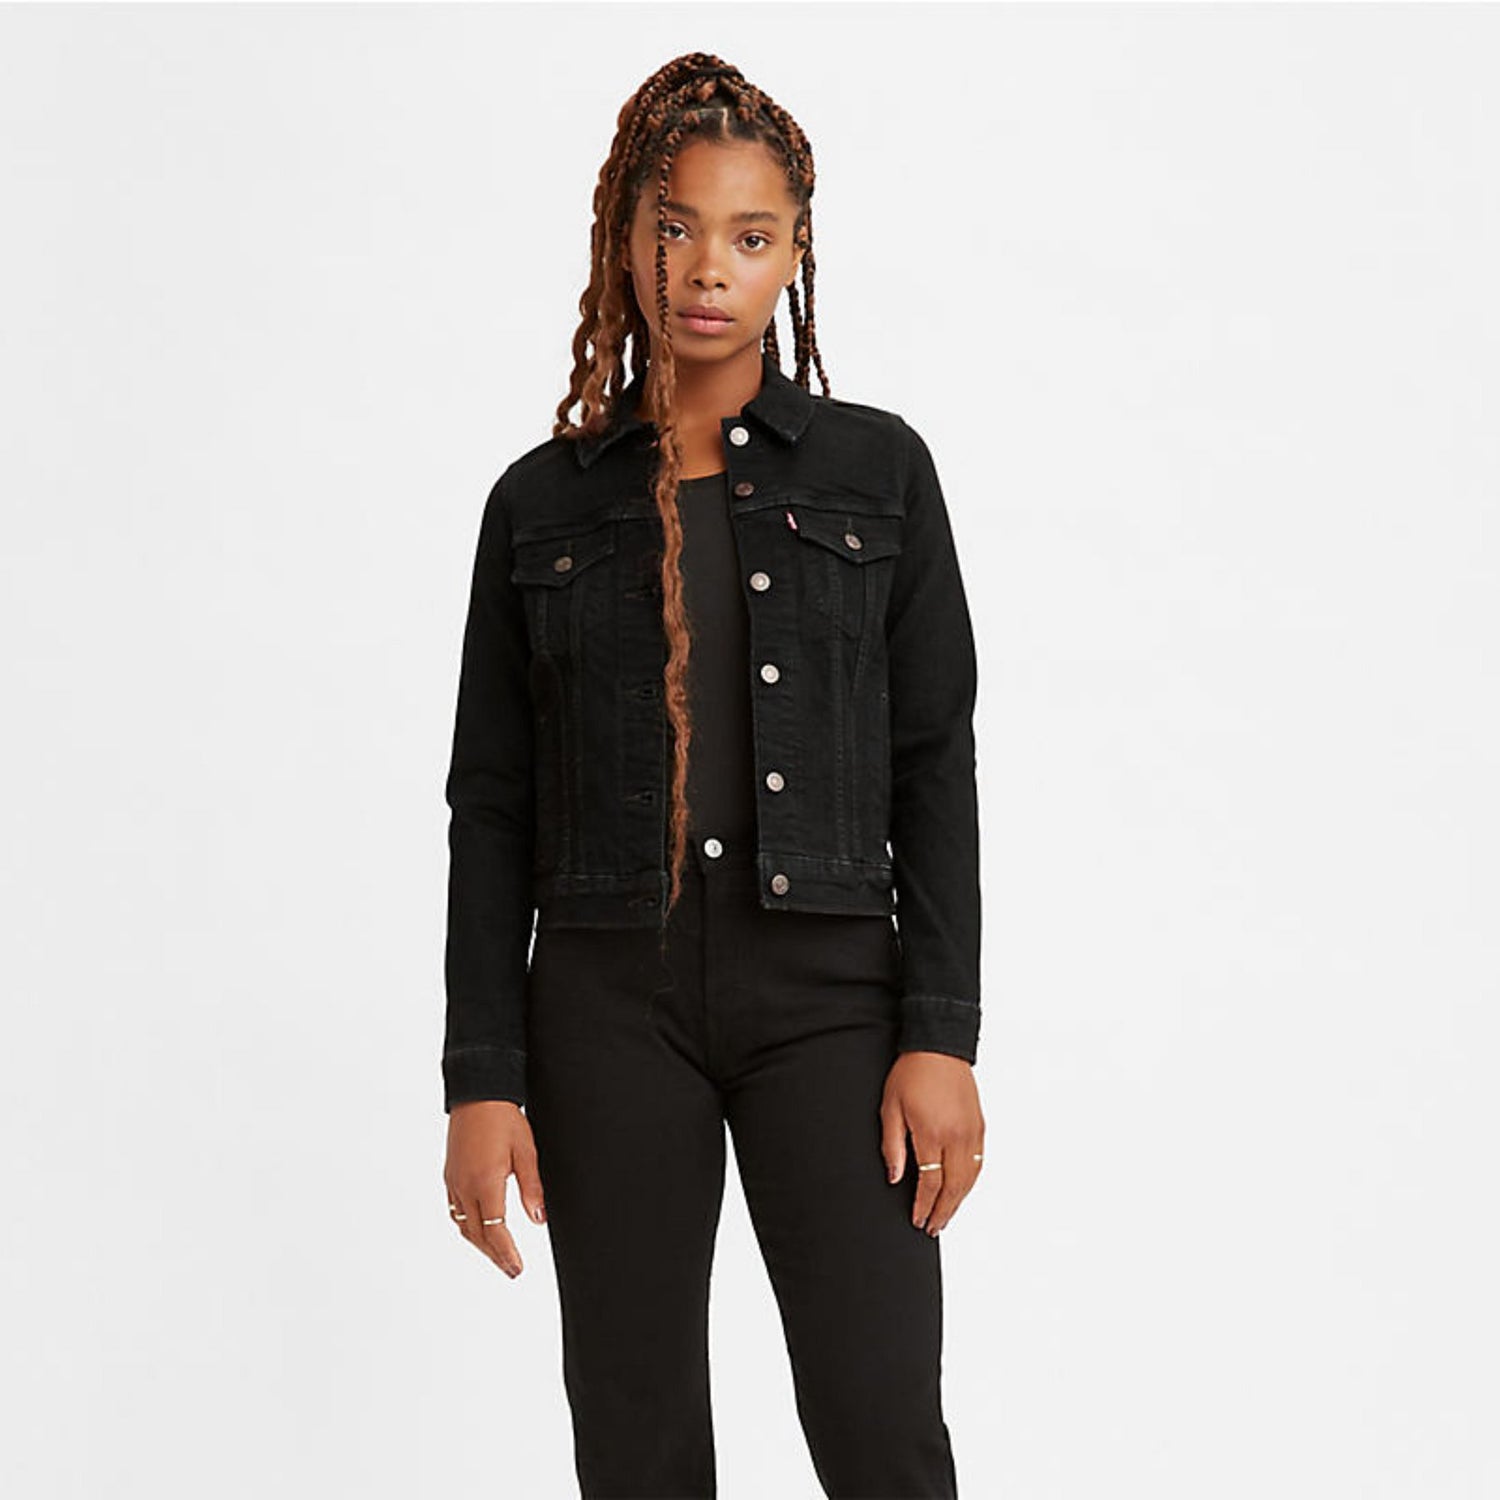 GIACCA JEANS 29945 Donna LEVI'S GIACCA JEANS